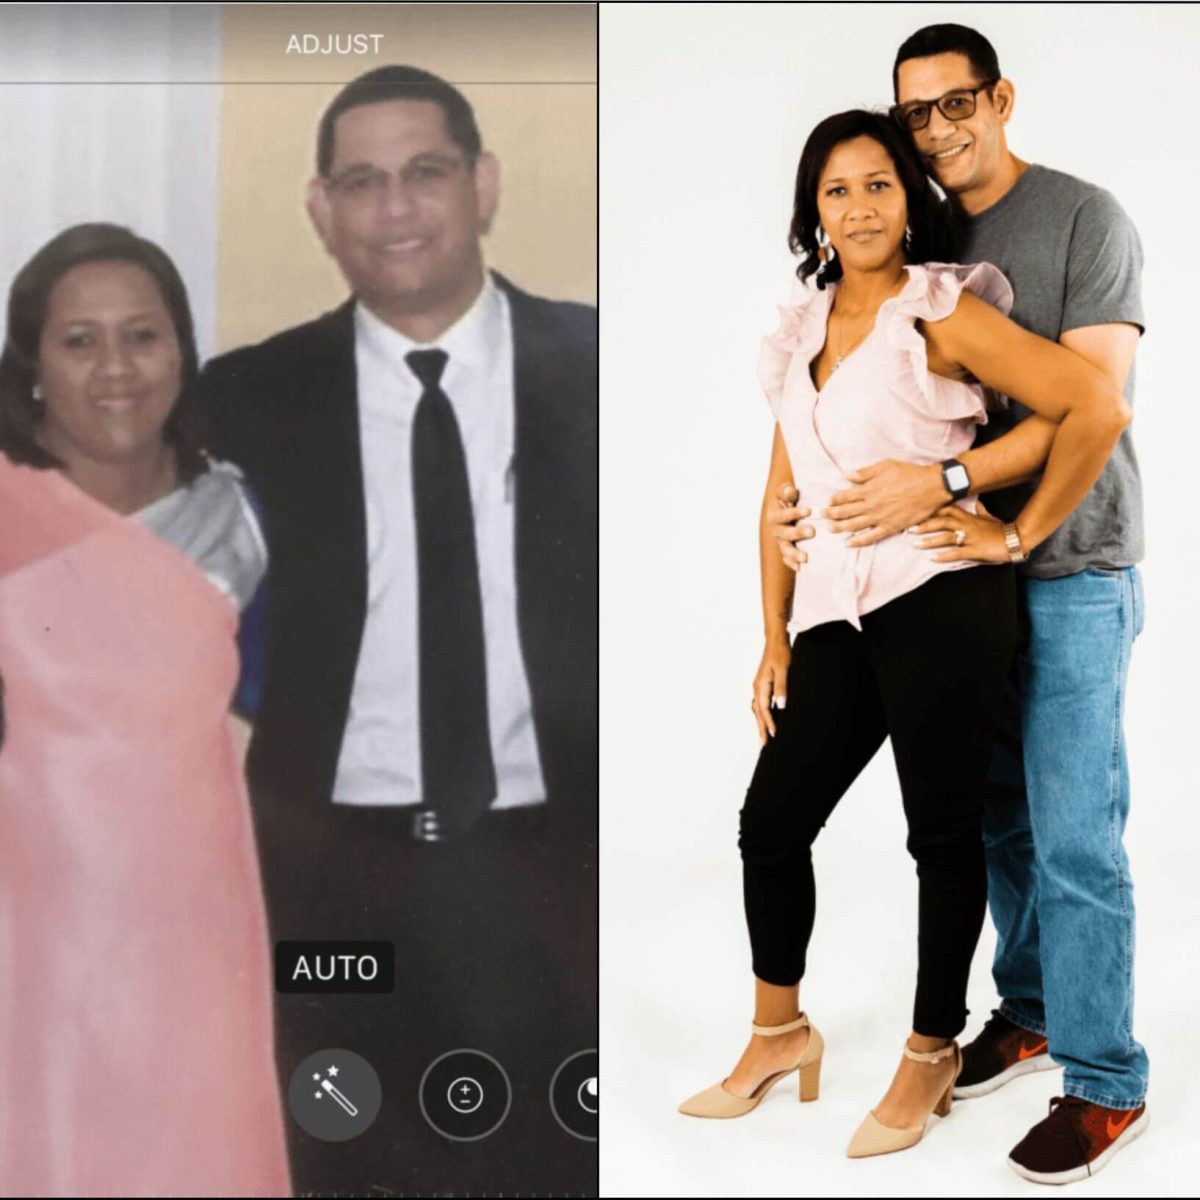 Two pictures of a man and woman posing for a photo.